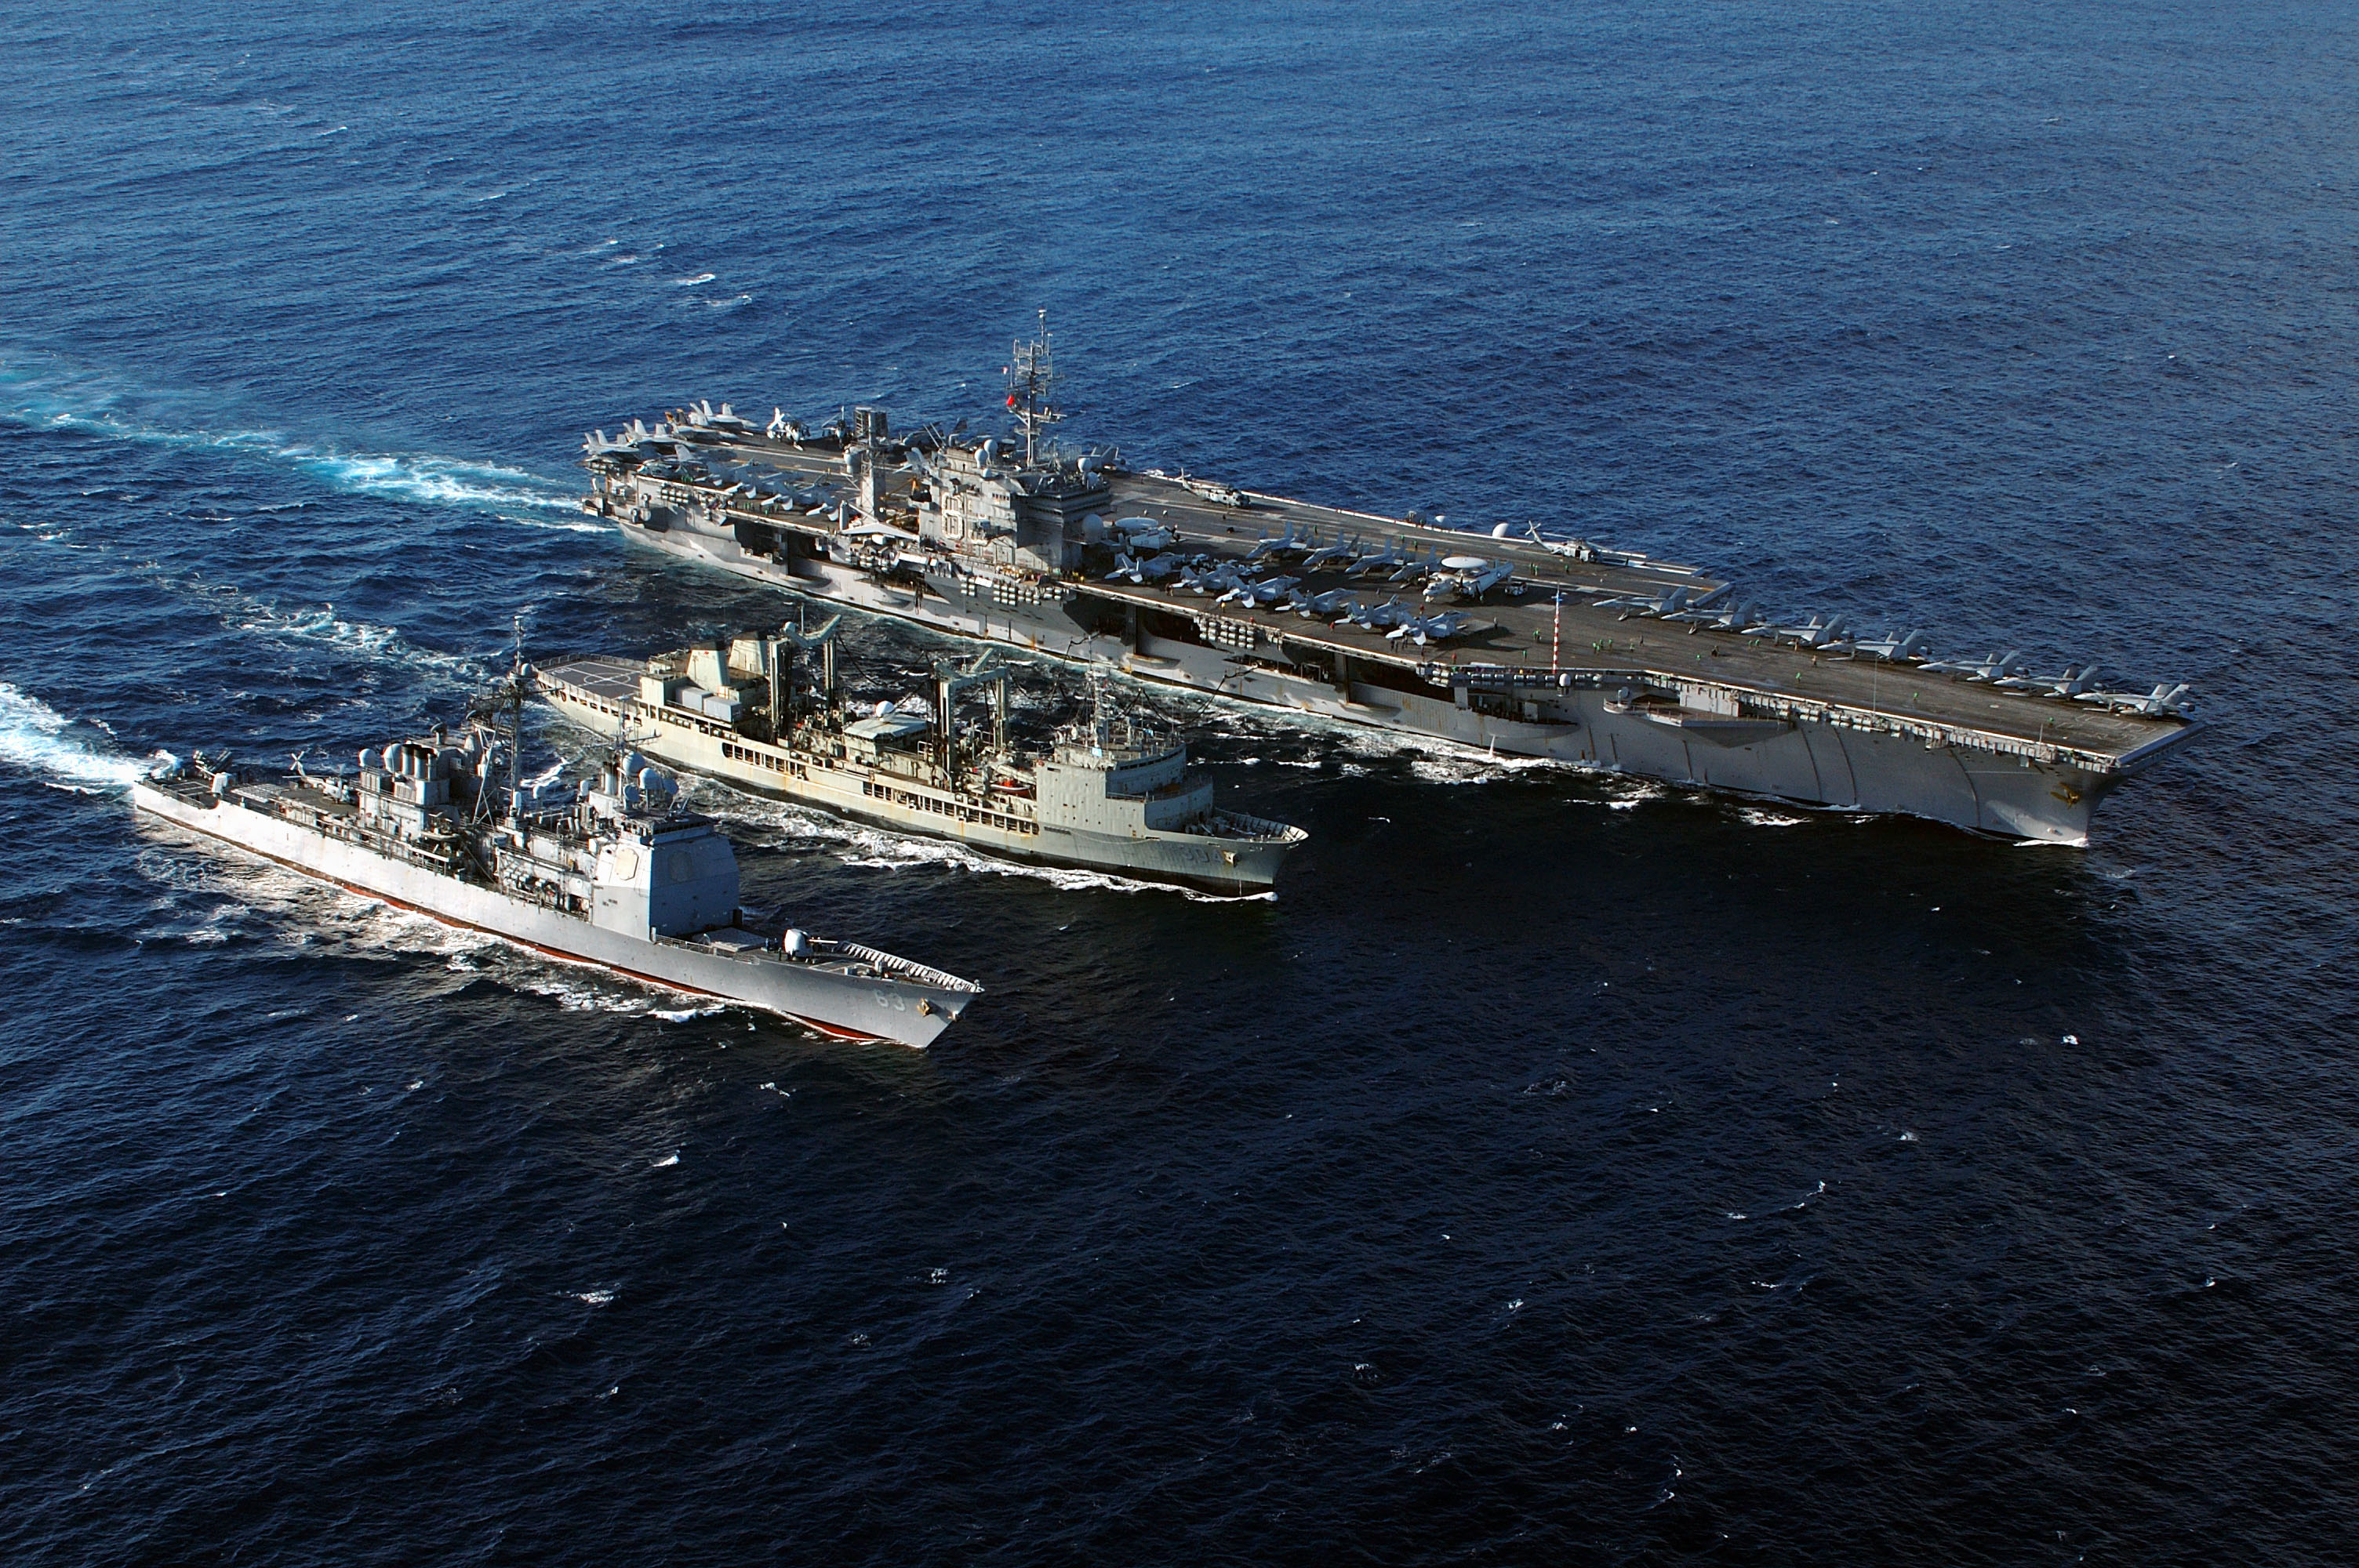 US_Navy_050614-N-0120R-050_The_conventionally_powered_aircraft_carrier_USS_Kitty_Hawk_%28CV_63%29_and_the_guided_missile_cruiser_USS_Cowpens_%28CG_63%29_receives_fuel_during_a_replenishment_at_sea.jpg